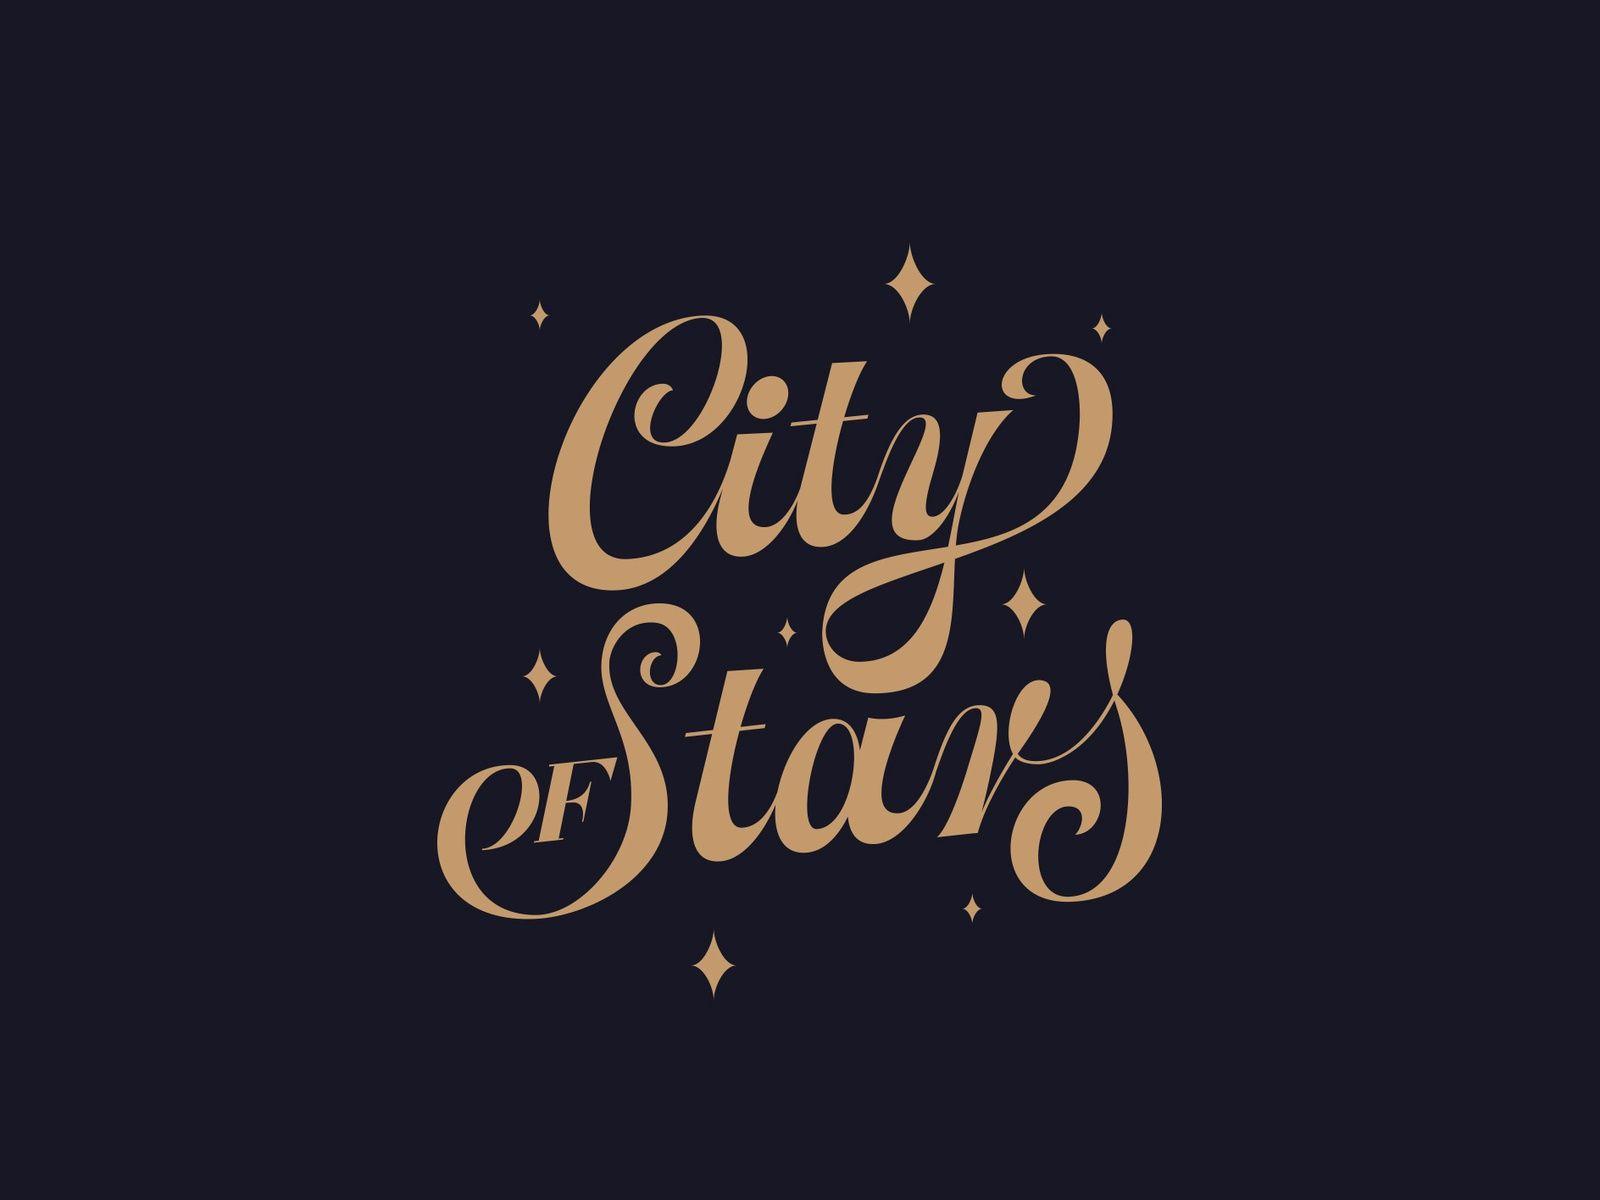 City Of Stars Wallpapers - Top Free City Of Stars Backgrounds